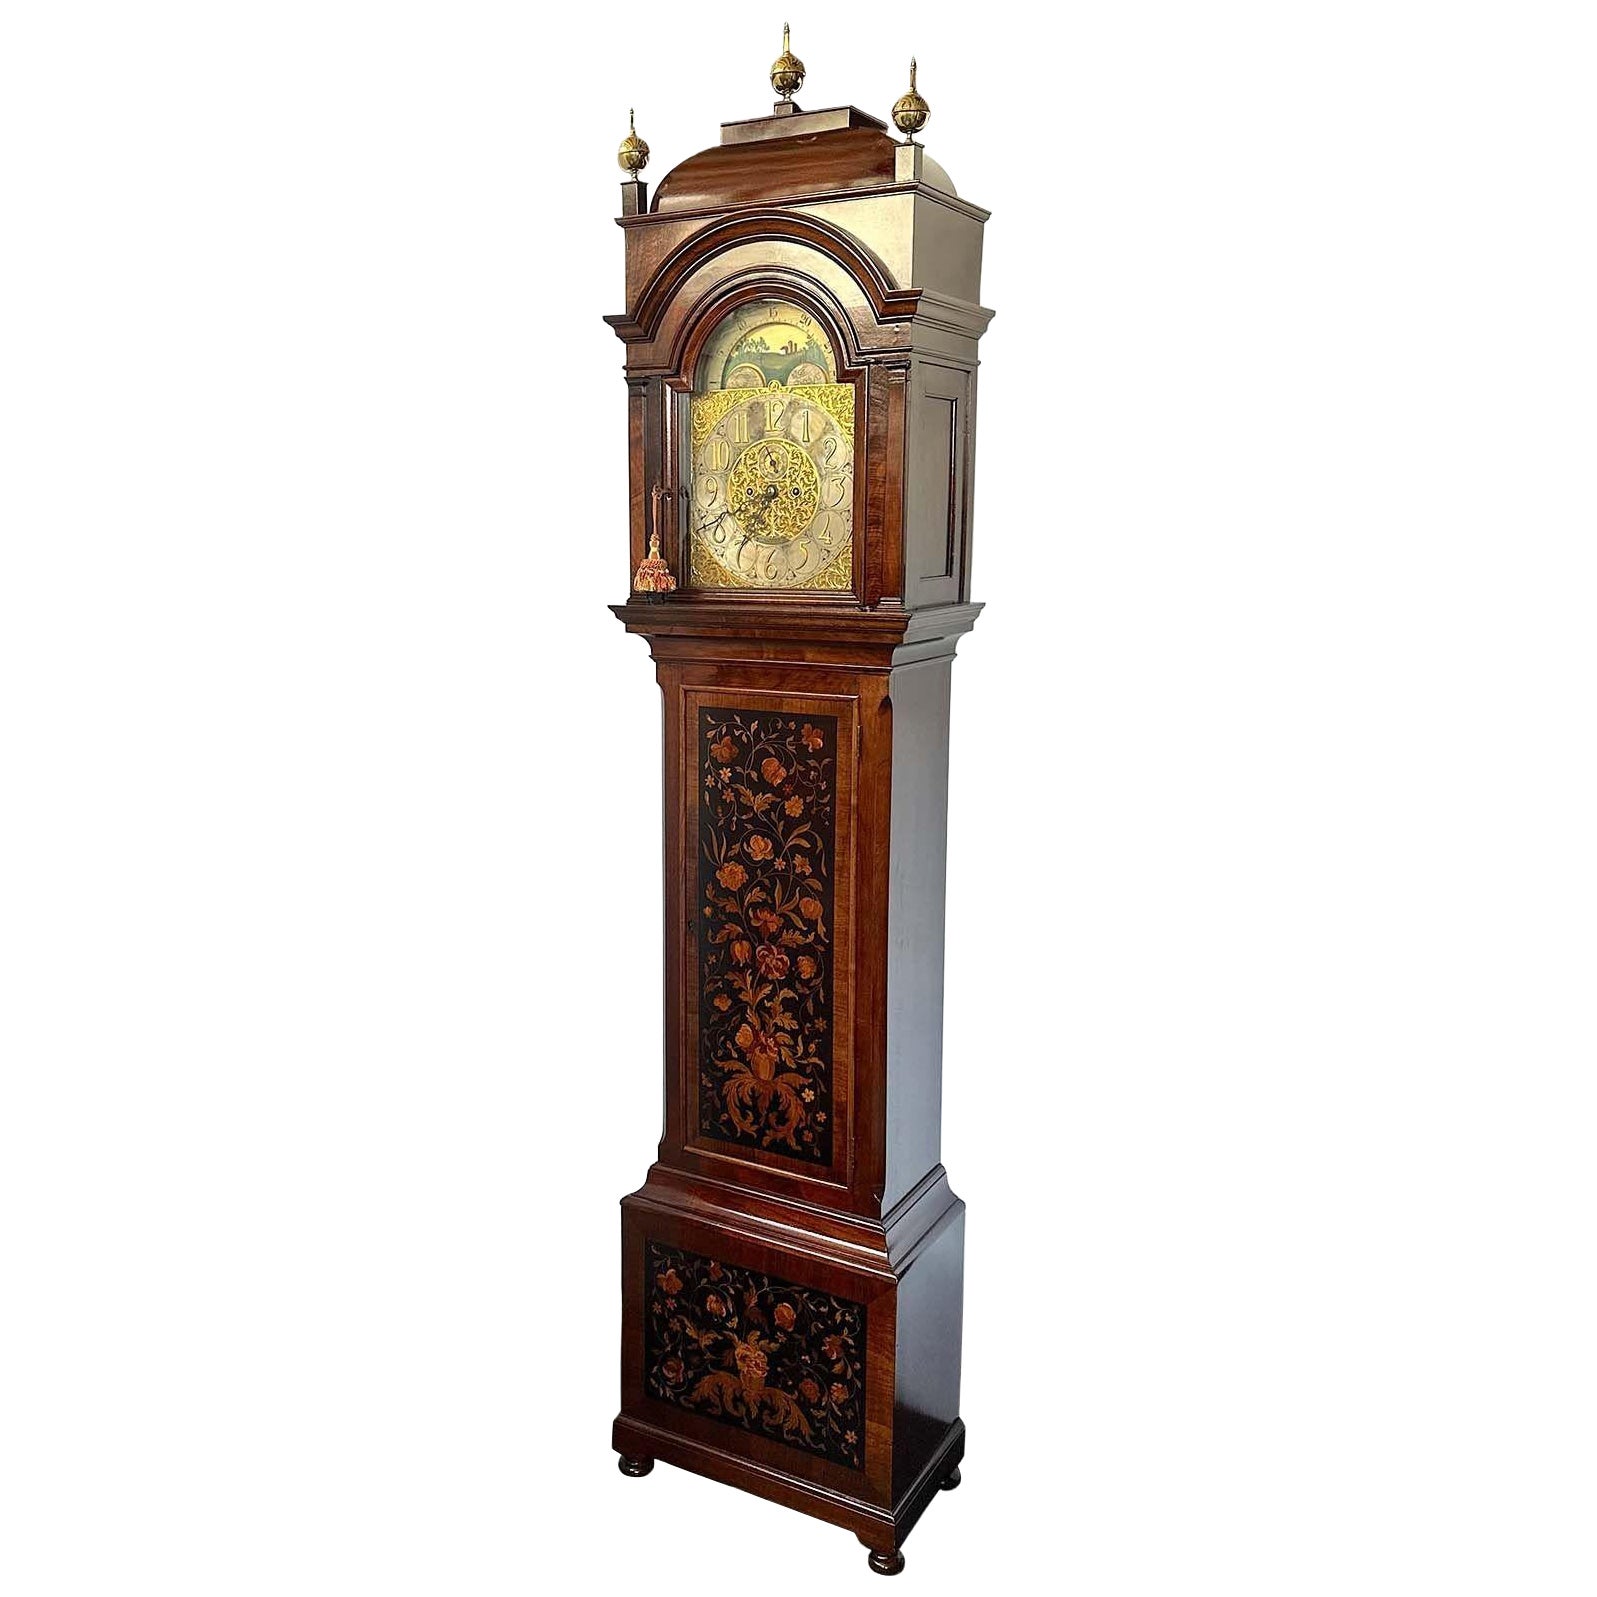 What is the moon on a grandfather clock?